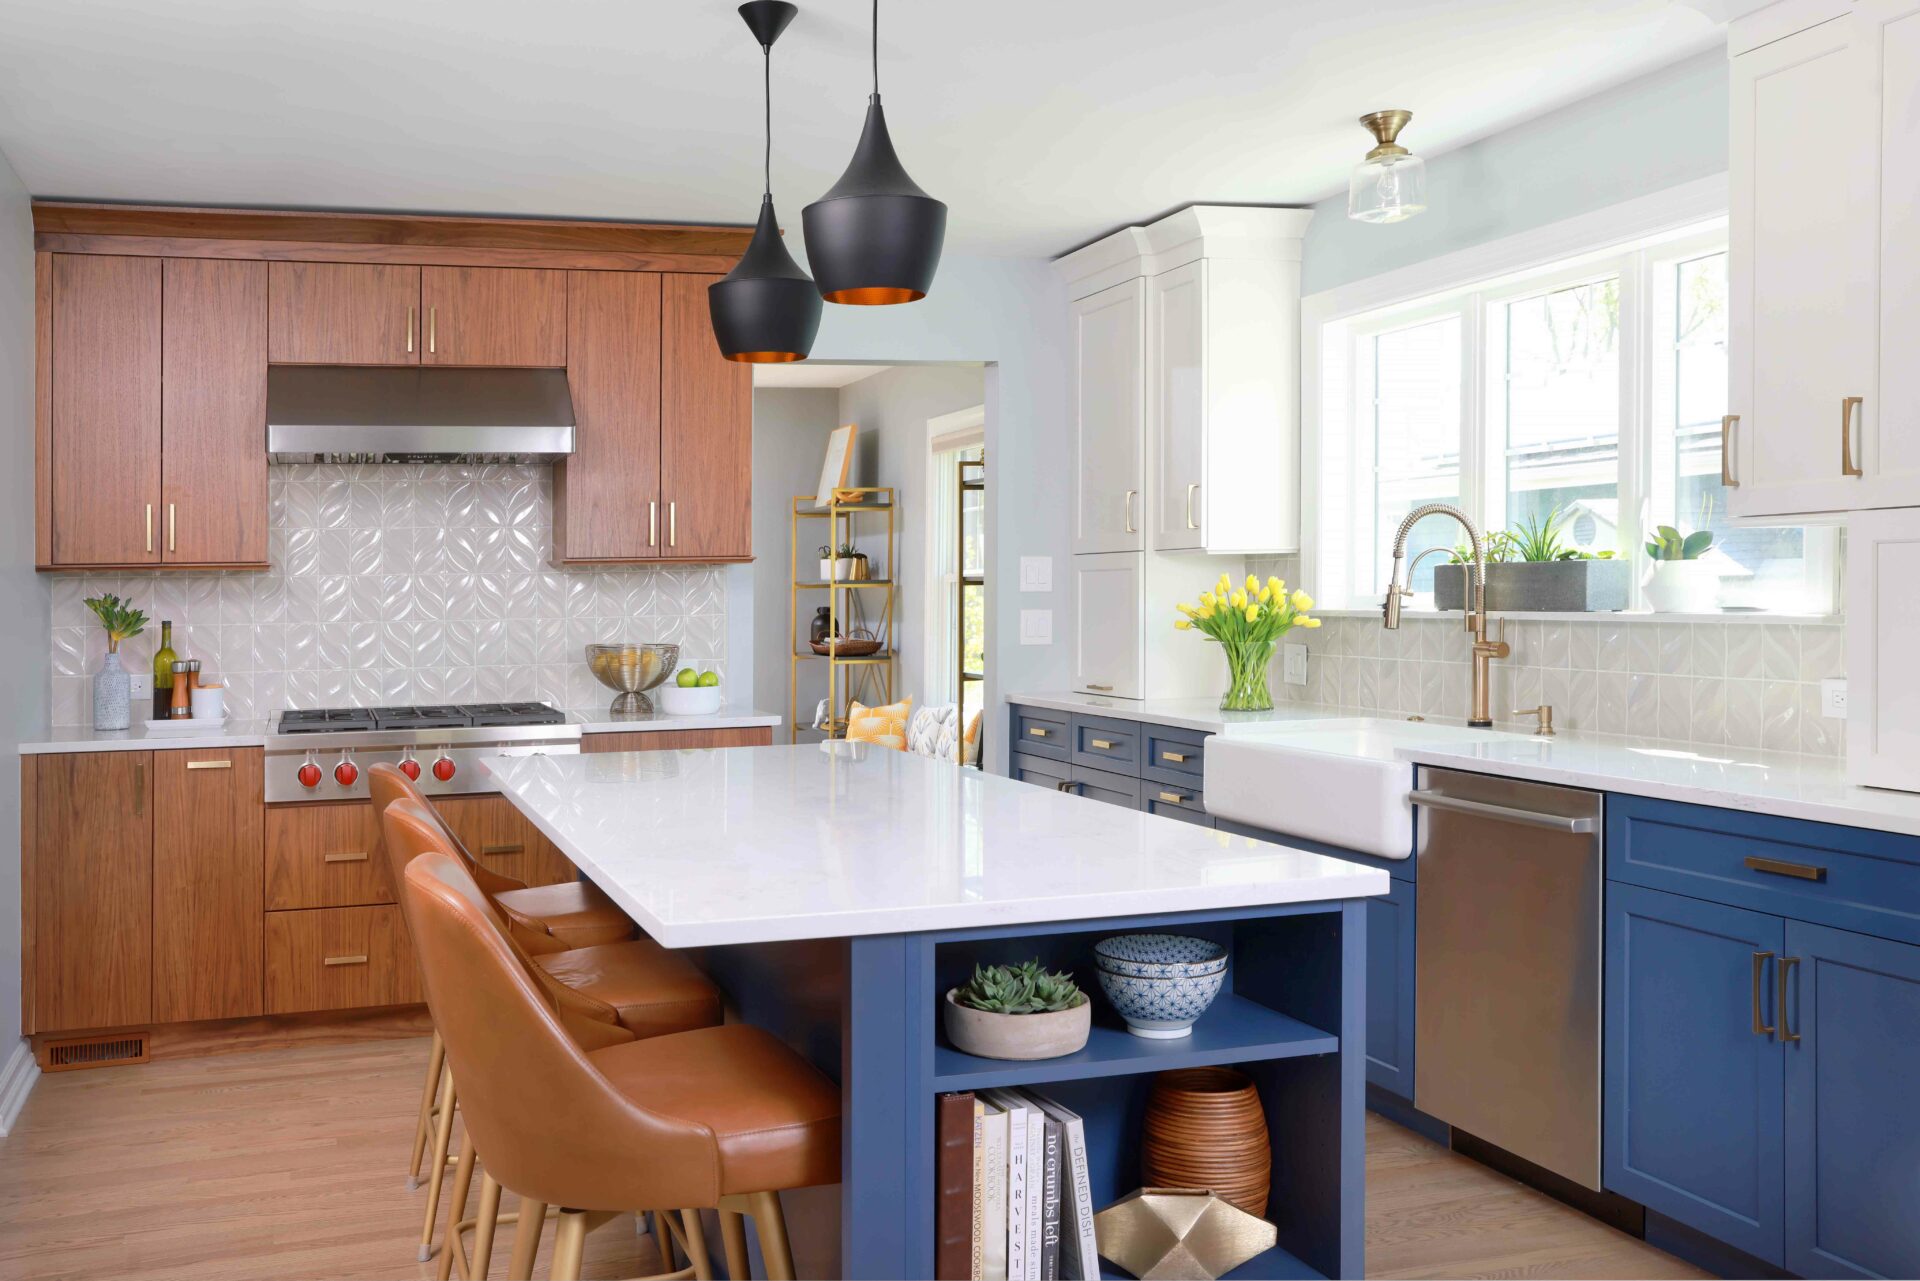 Three color kitchen cabinets are walnut, white and blue, with blue island